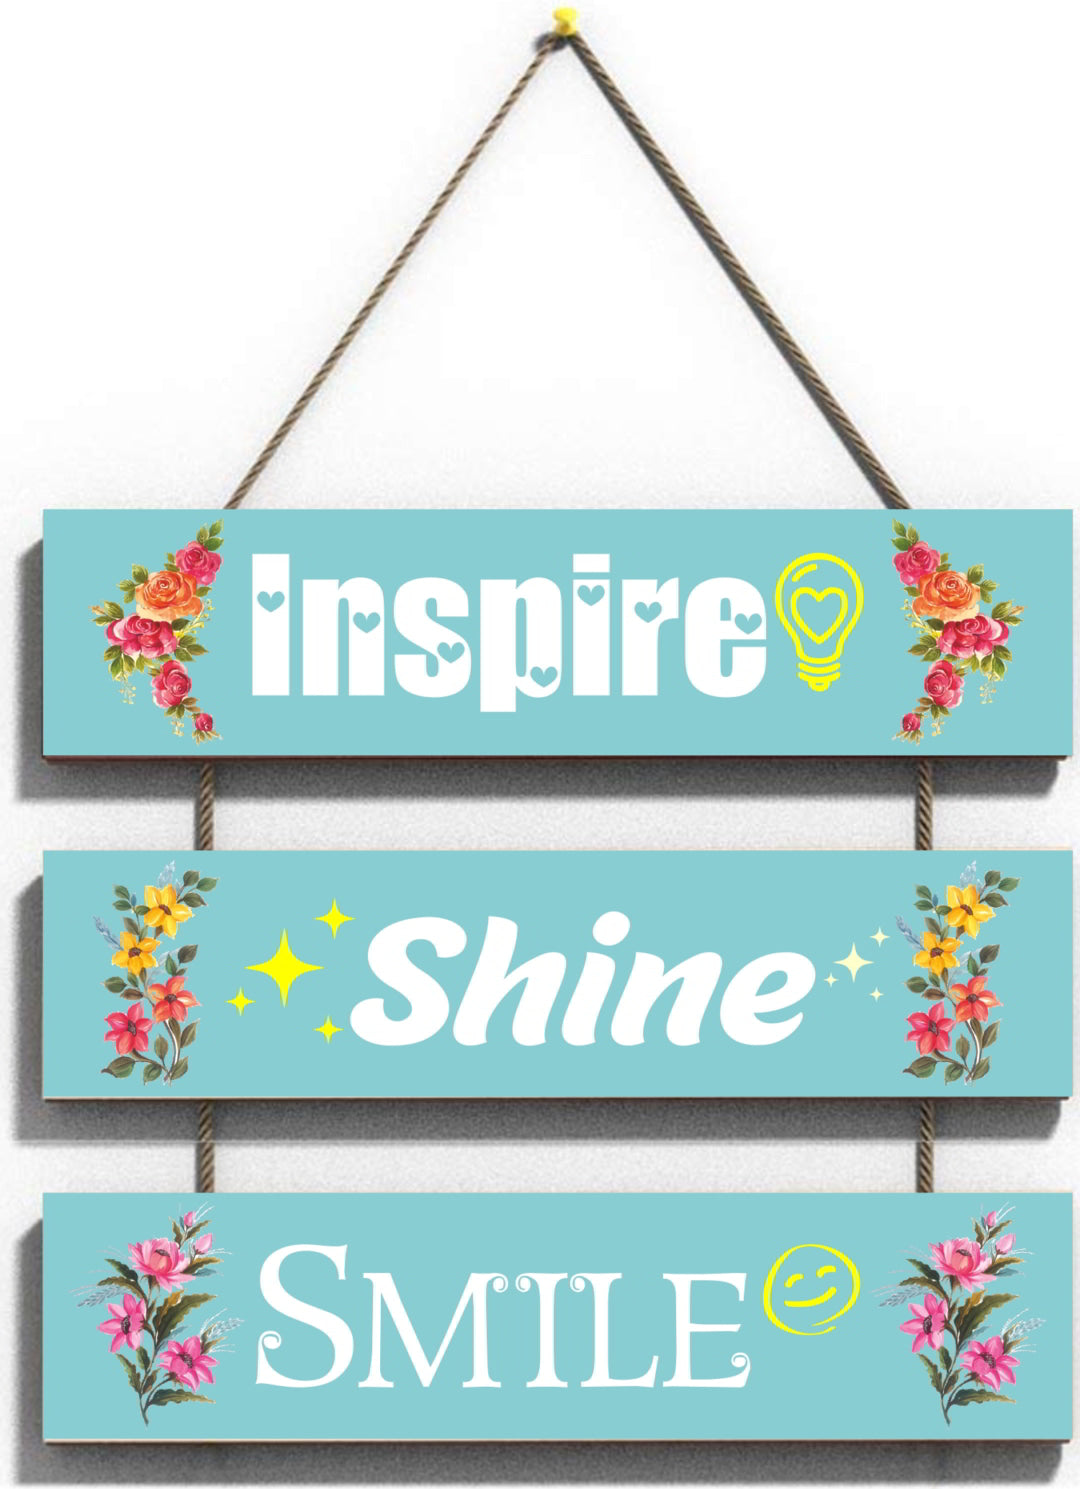 Inspire Shine Smile Wall Hanging Board